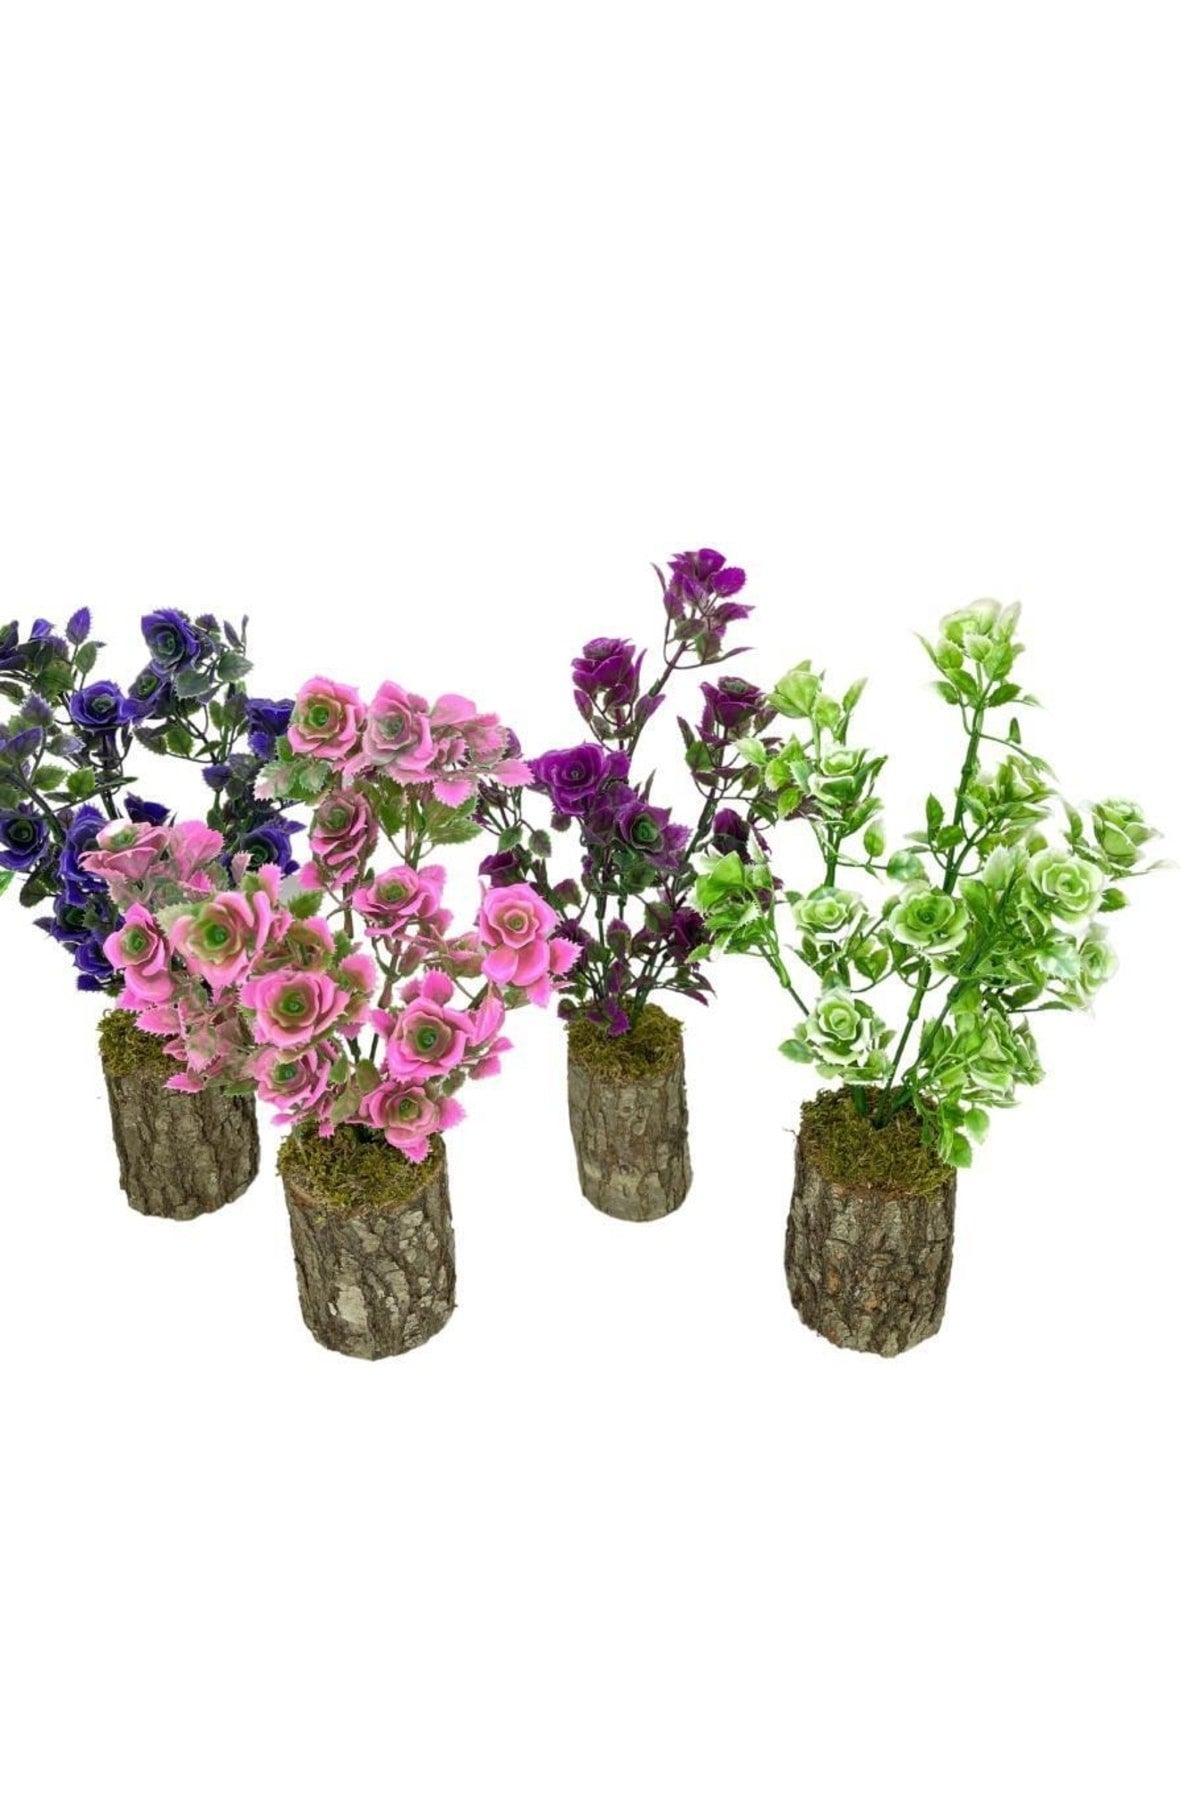 Artificial Flower Bunch of Fuchsia Roses on a Log Decorative Table Flower 30*20cm - Swordslife